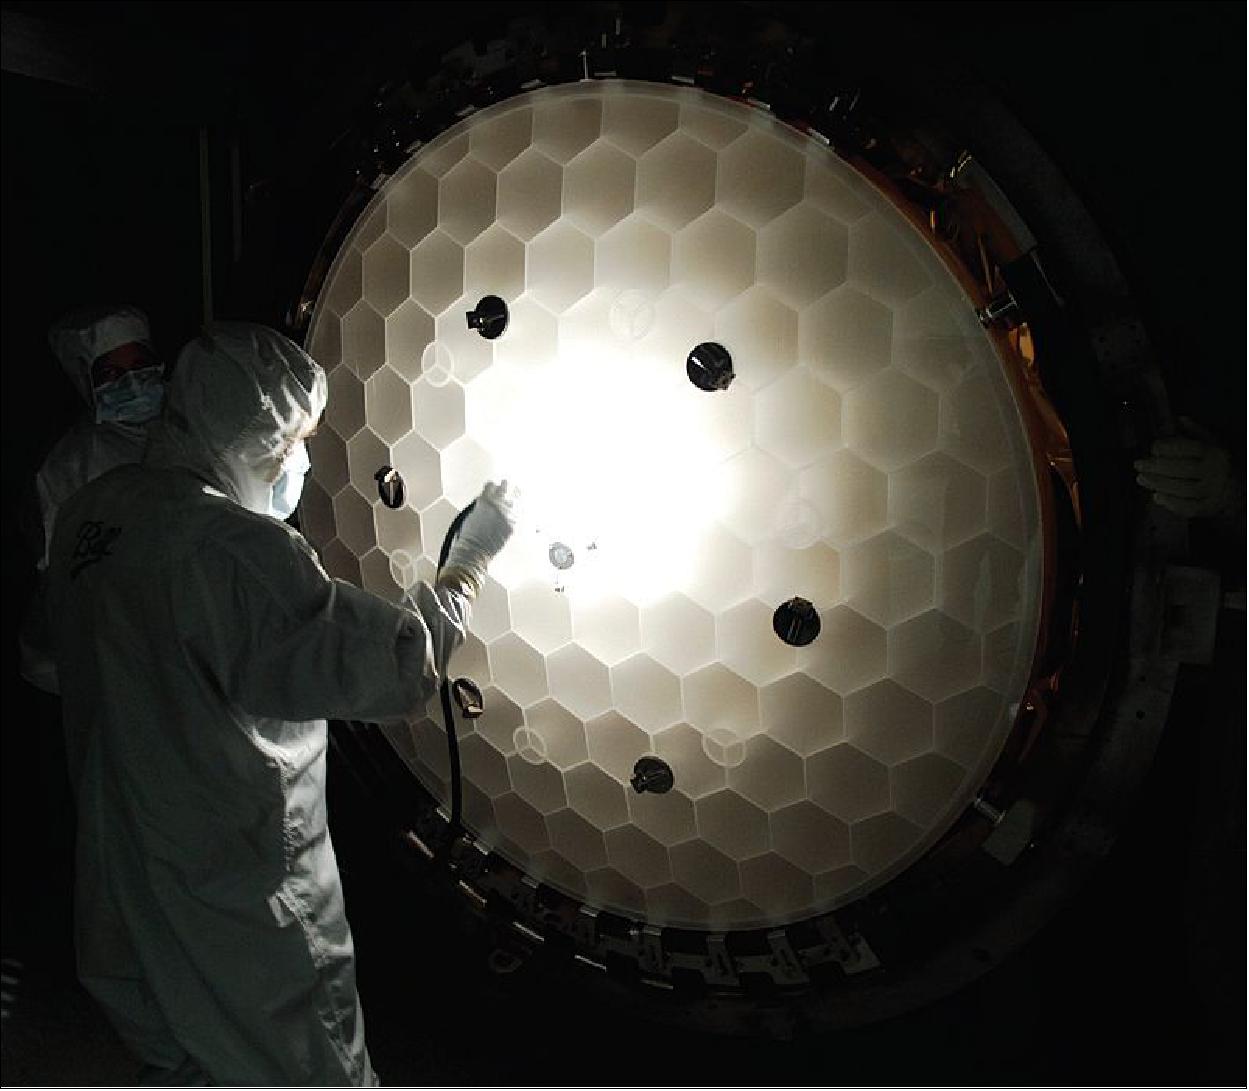 Figure 9: Inspection of the 1.4 meter primary mirror honeycomb structure. The mirror has been 86% light weighted, and only weighs 14% of a solid mirror of the same dimensions (image credit: NASA, Kepler Team)